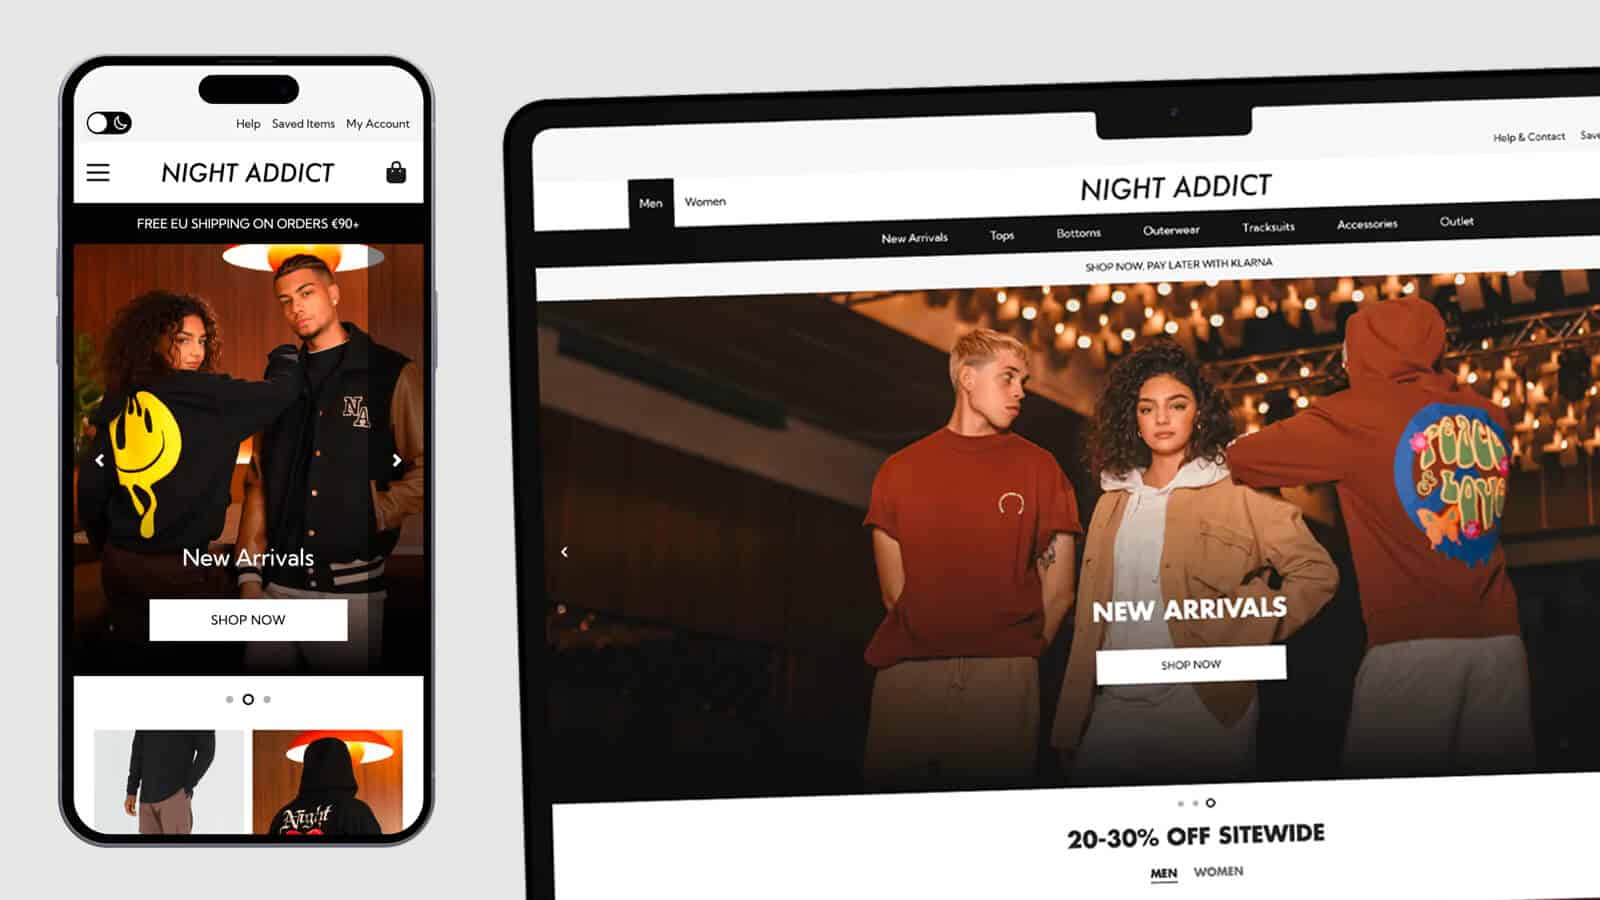 Banks Digital delivers ecommerce site for streetwear brand Night